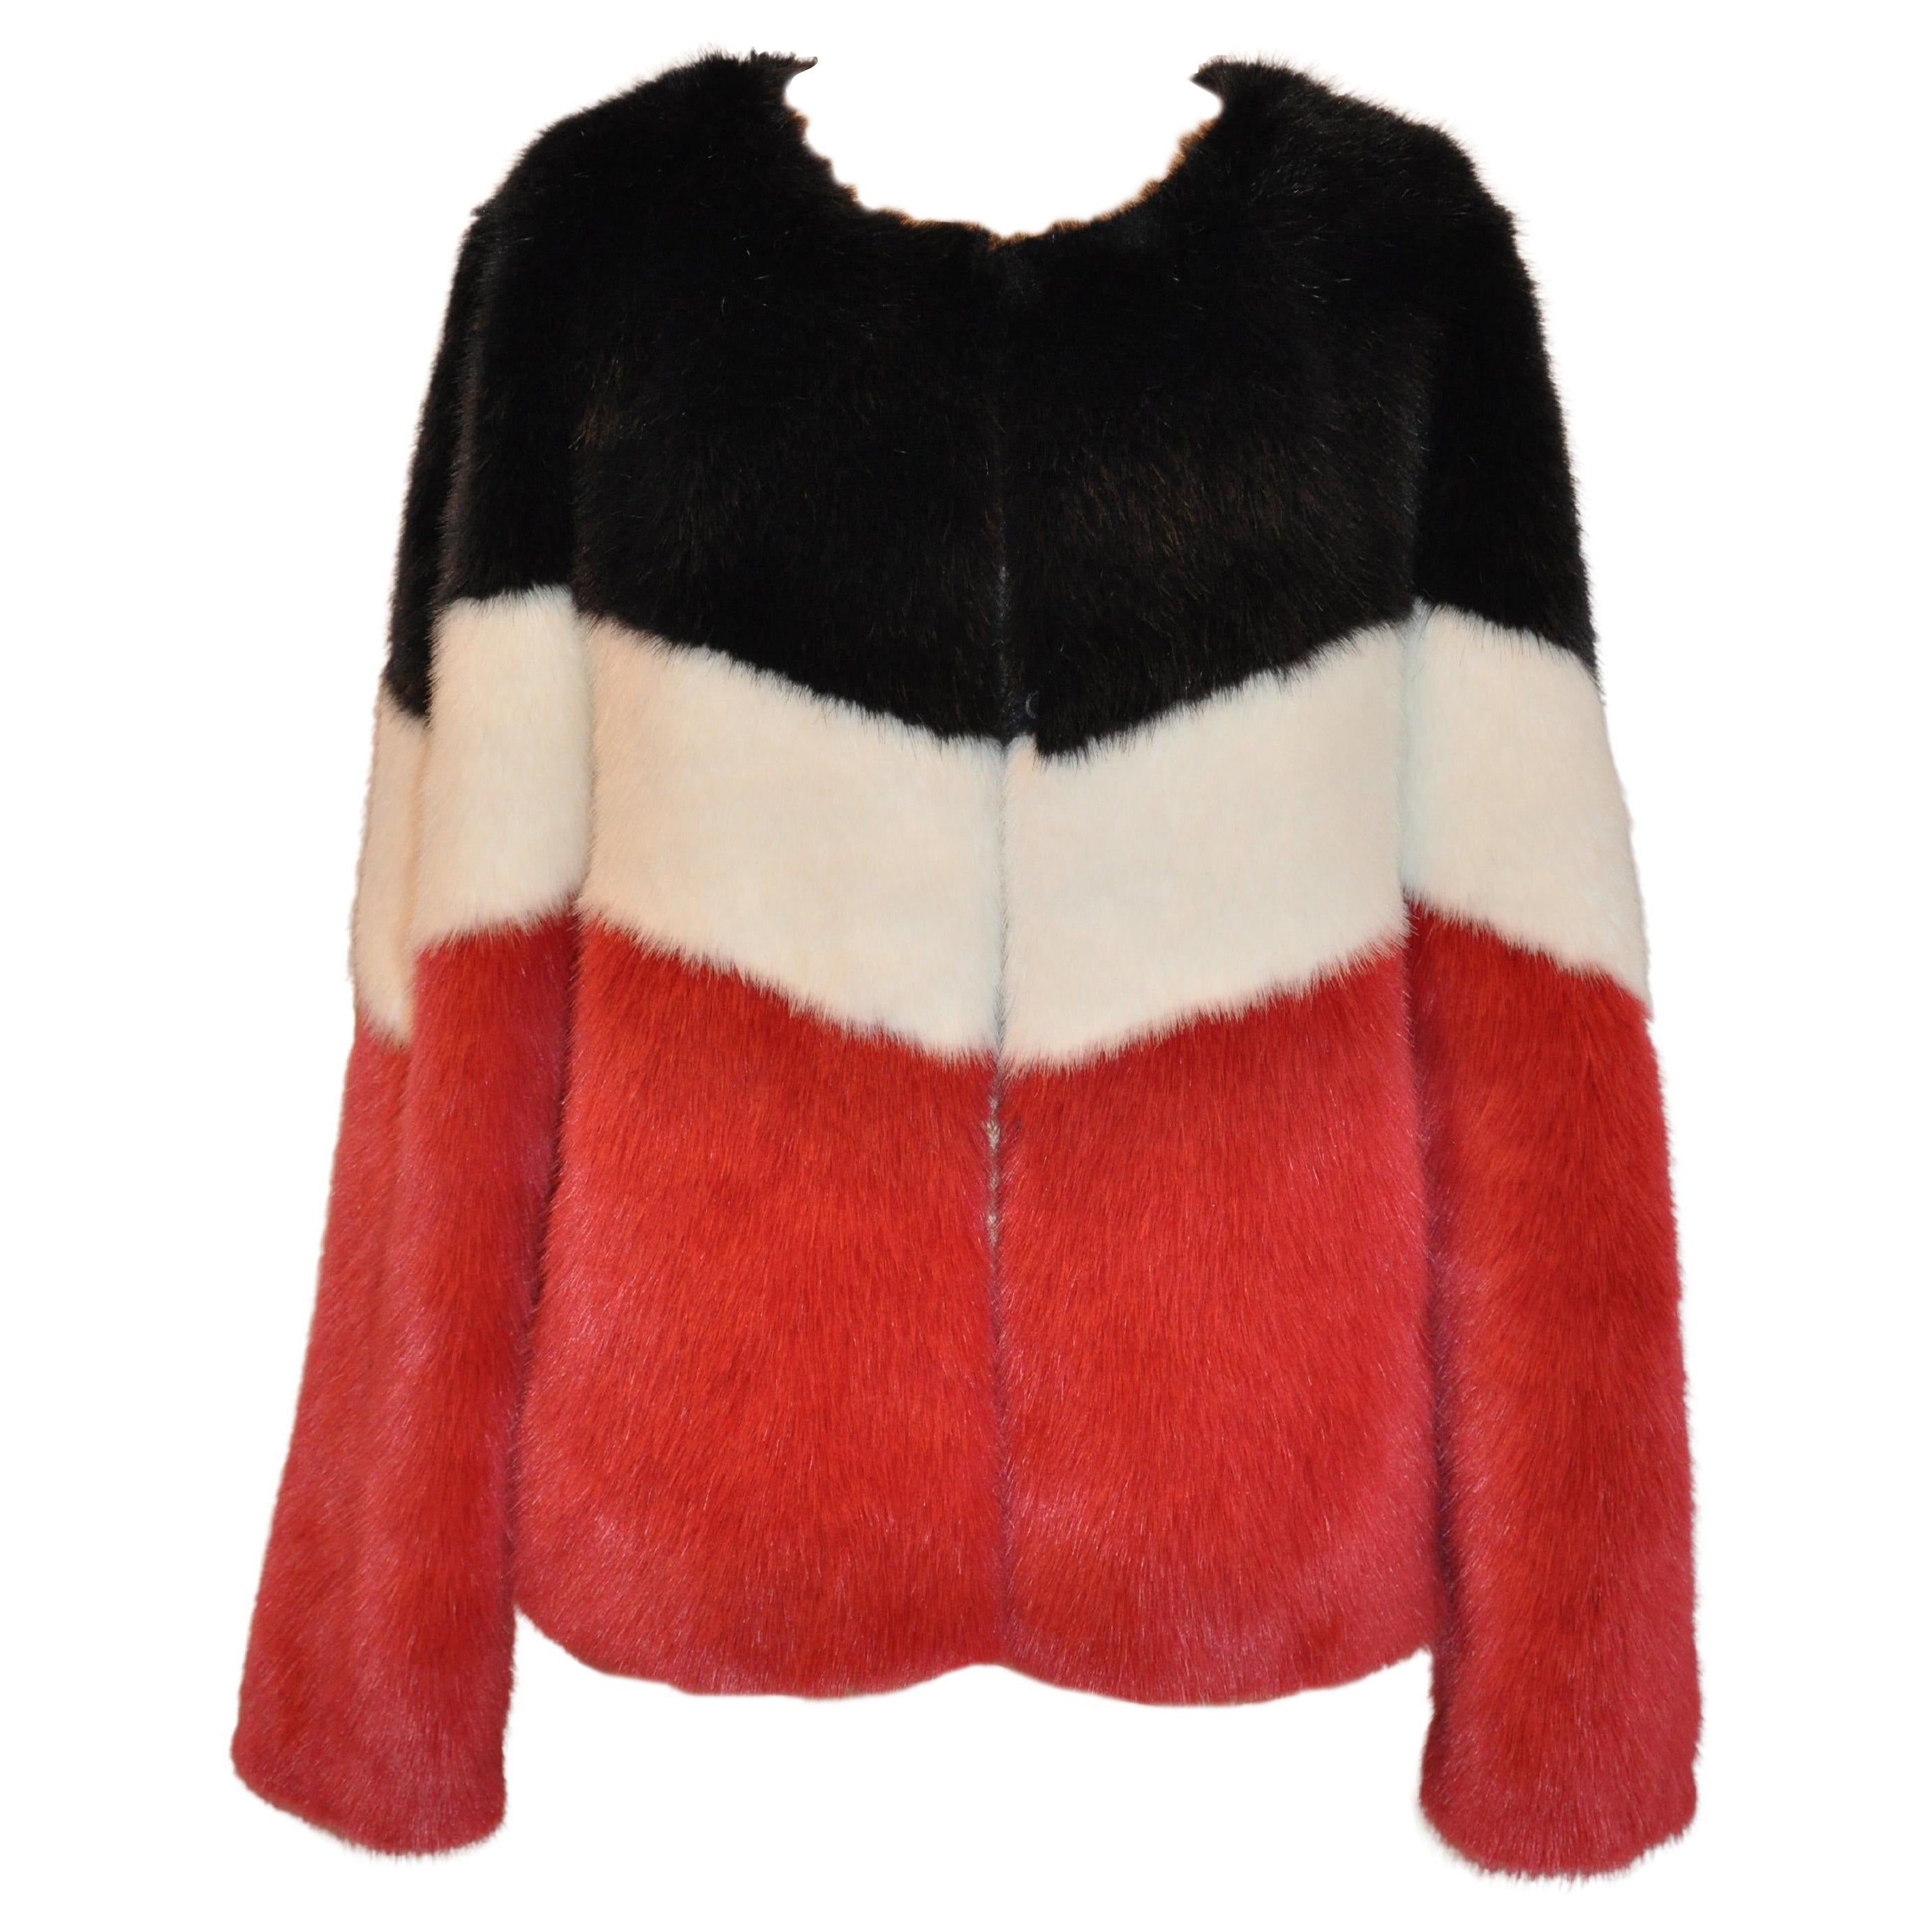 Winter-White, Italian-Red & Midnight-Black Cropped Faux-Fur "Mink" Jacket For Sale